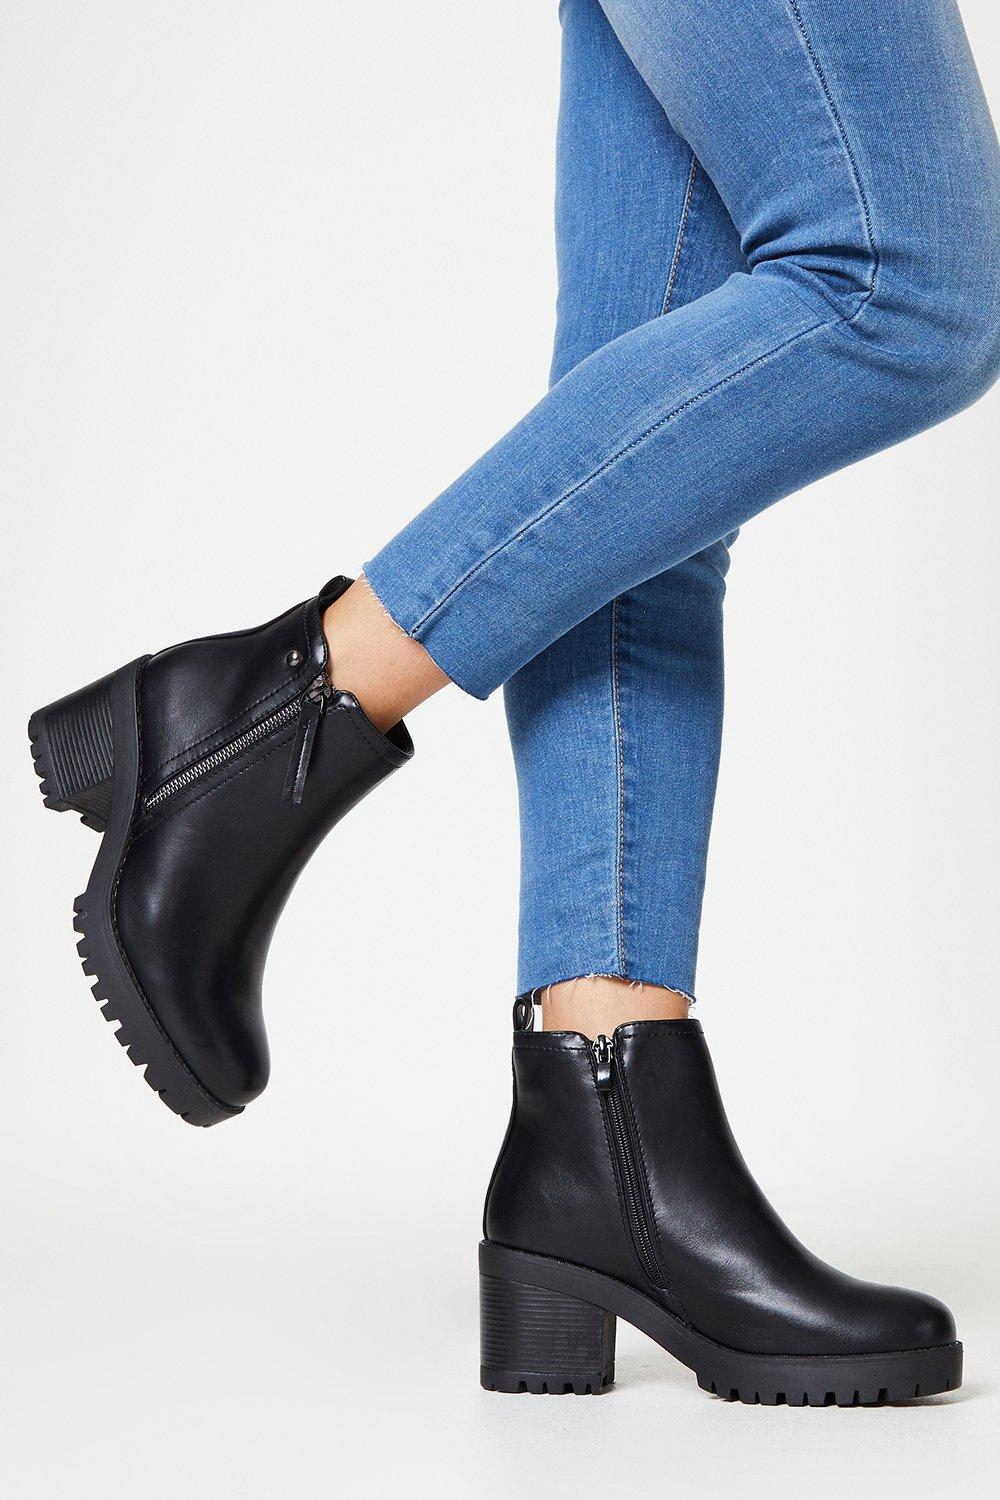 Women’s Faith: Madden Cleated Chunky Side Zip Block Heel Ankle Boots - black - 4